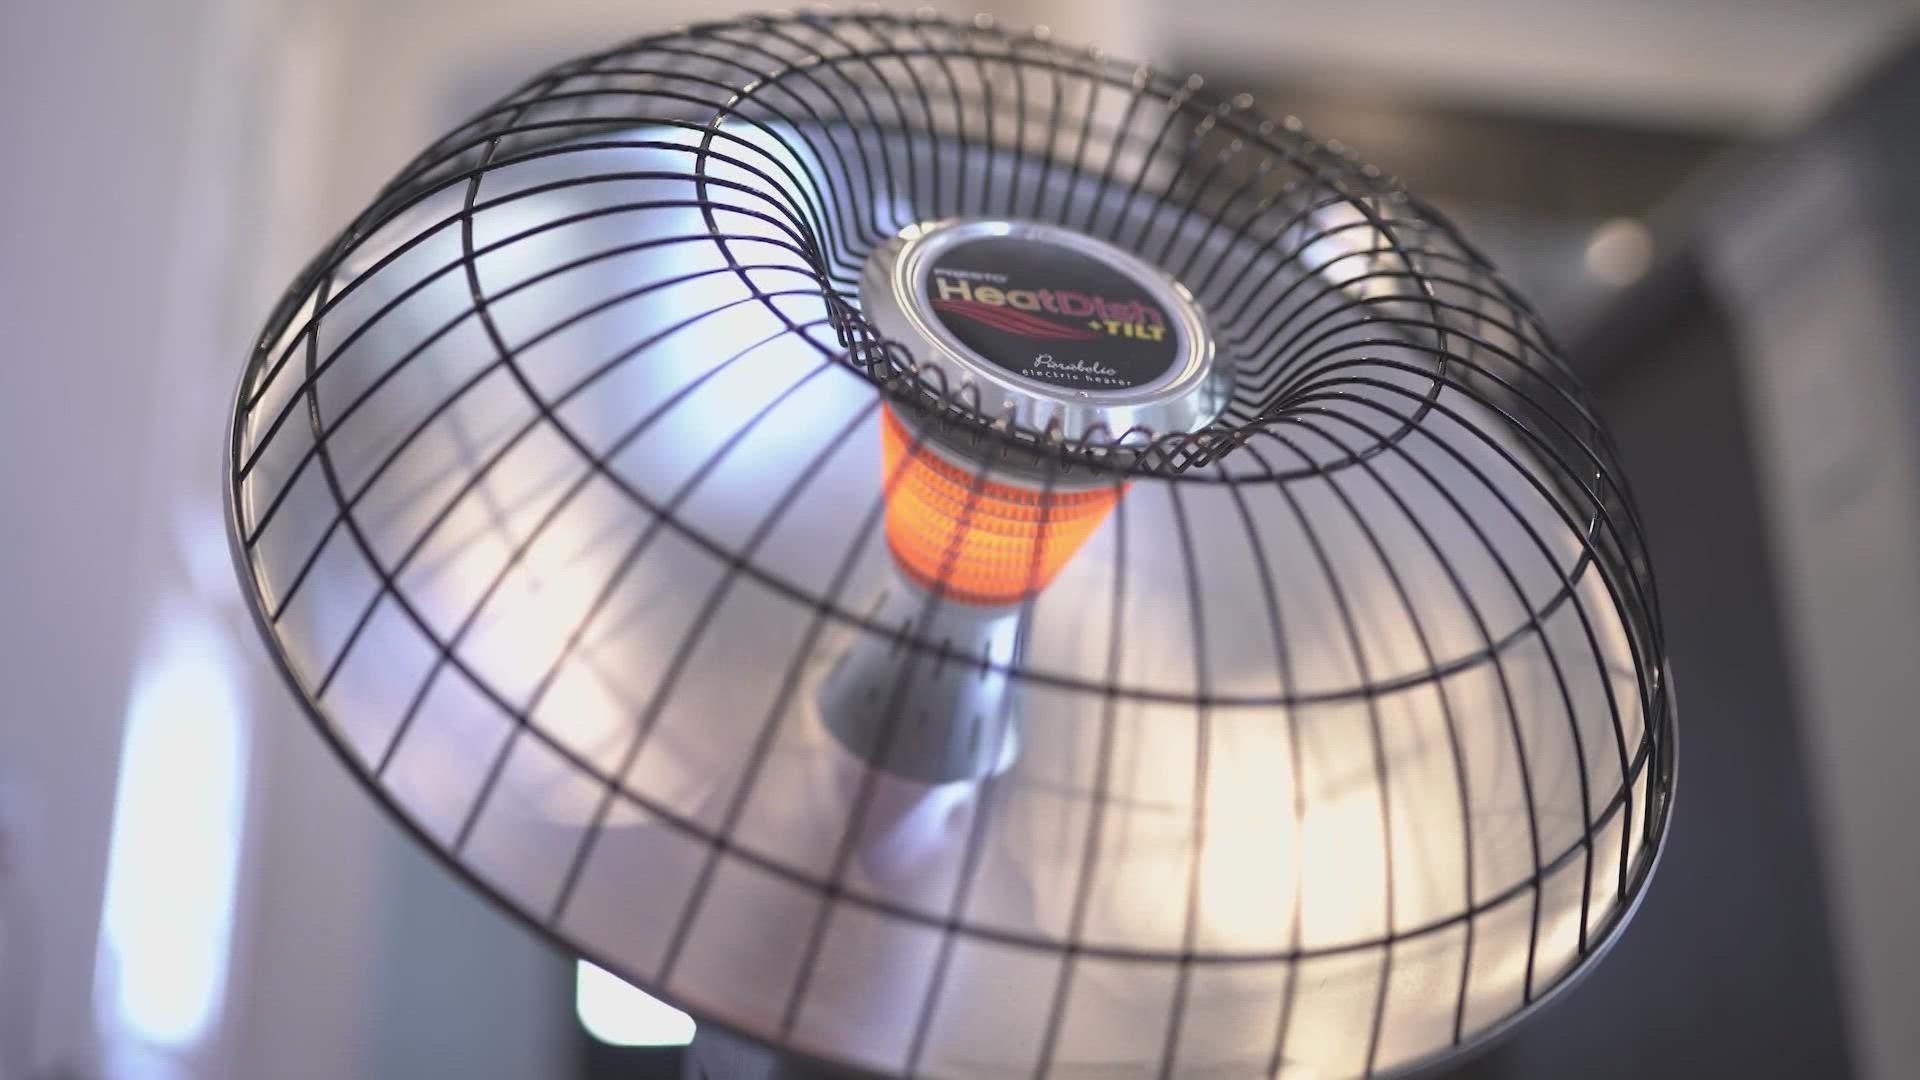 Tuesday night, Atmos is responding to demands from a North Texas lawmaker after some customers didn't get heat during the winter.